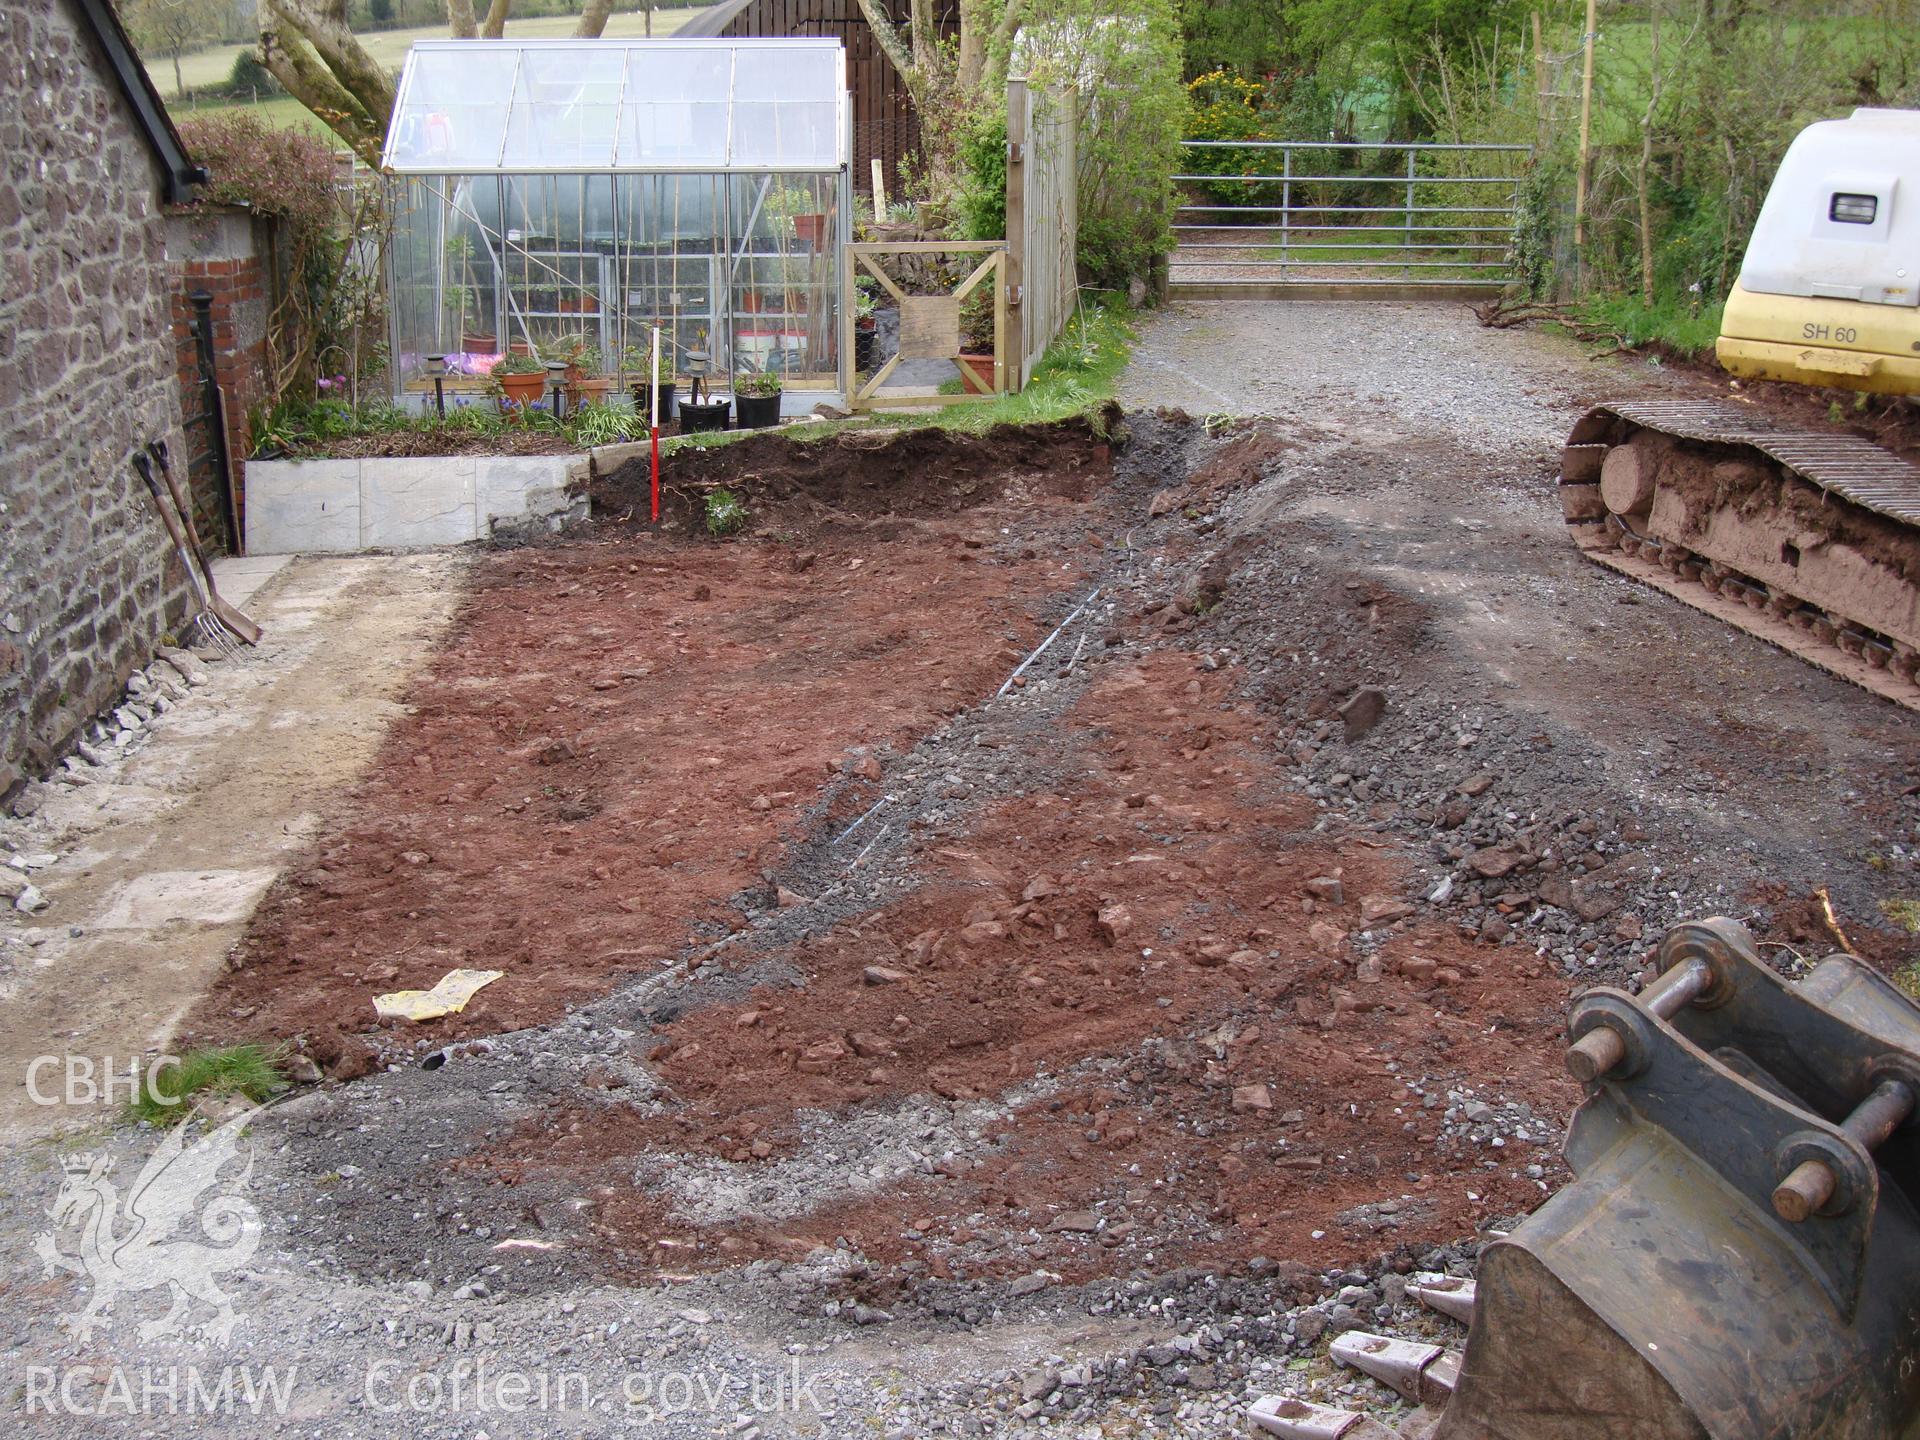 Digital colour photograph showing the final level of Area 1 showing service trench and driveway, looking North East. Taken from a watching brief of Vicarage Bungalow, Llanddeusant.